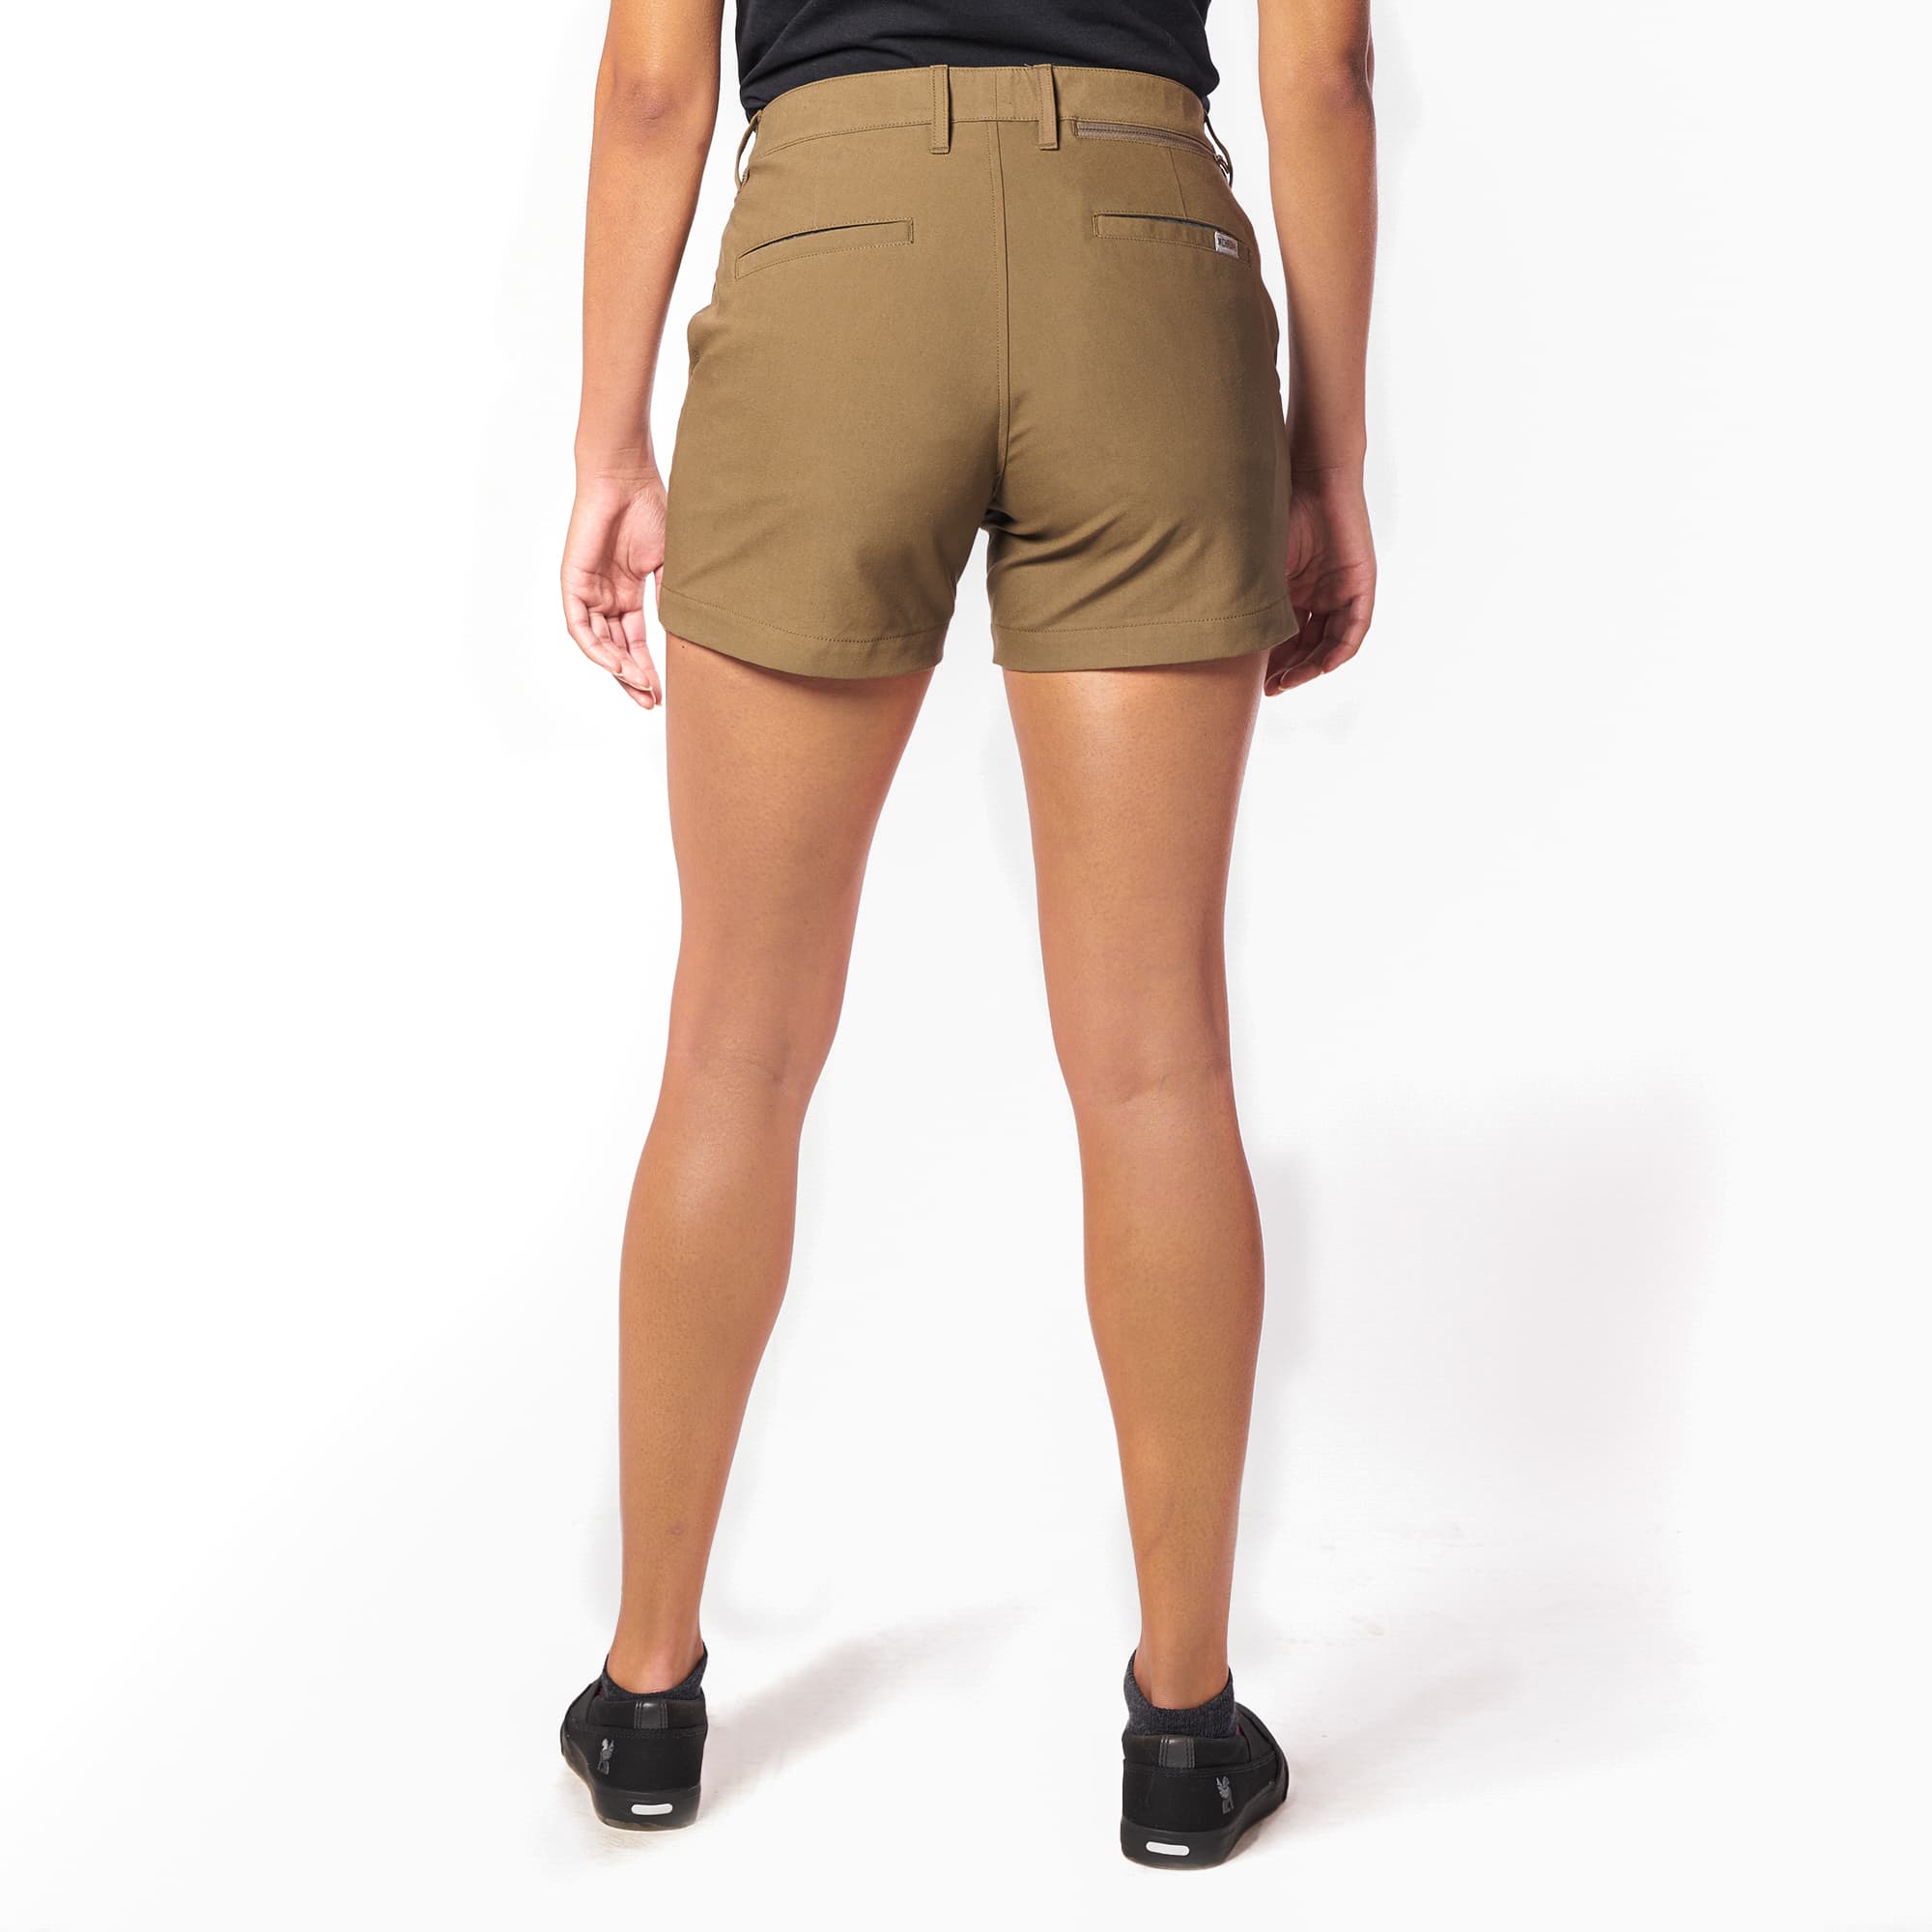 Women's Seneca Short in tan worn by a woman back view #color_stone grey